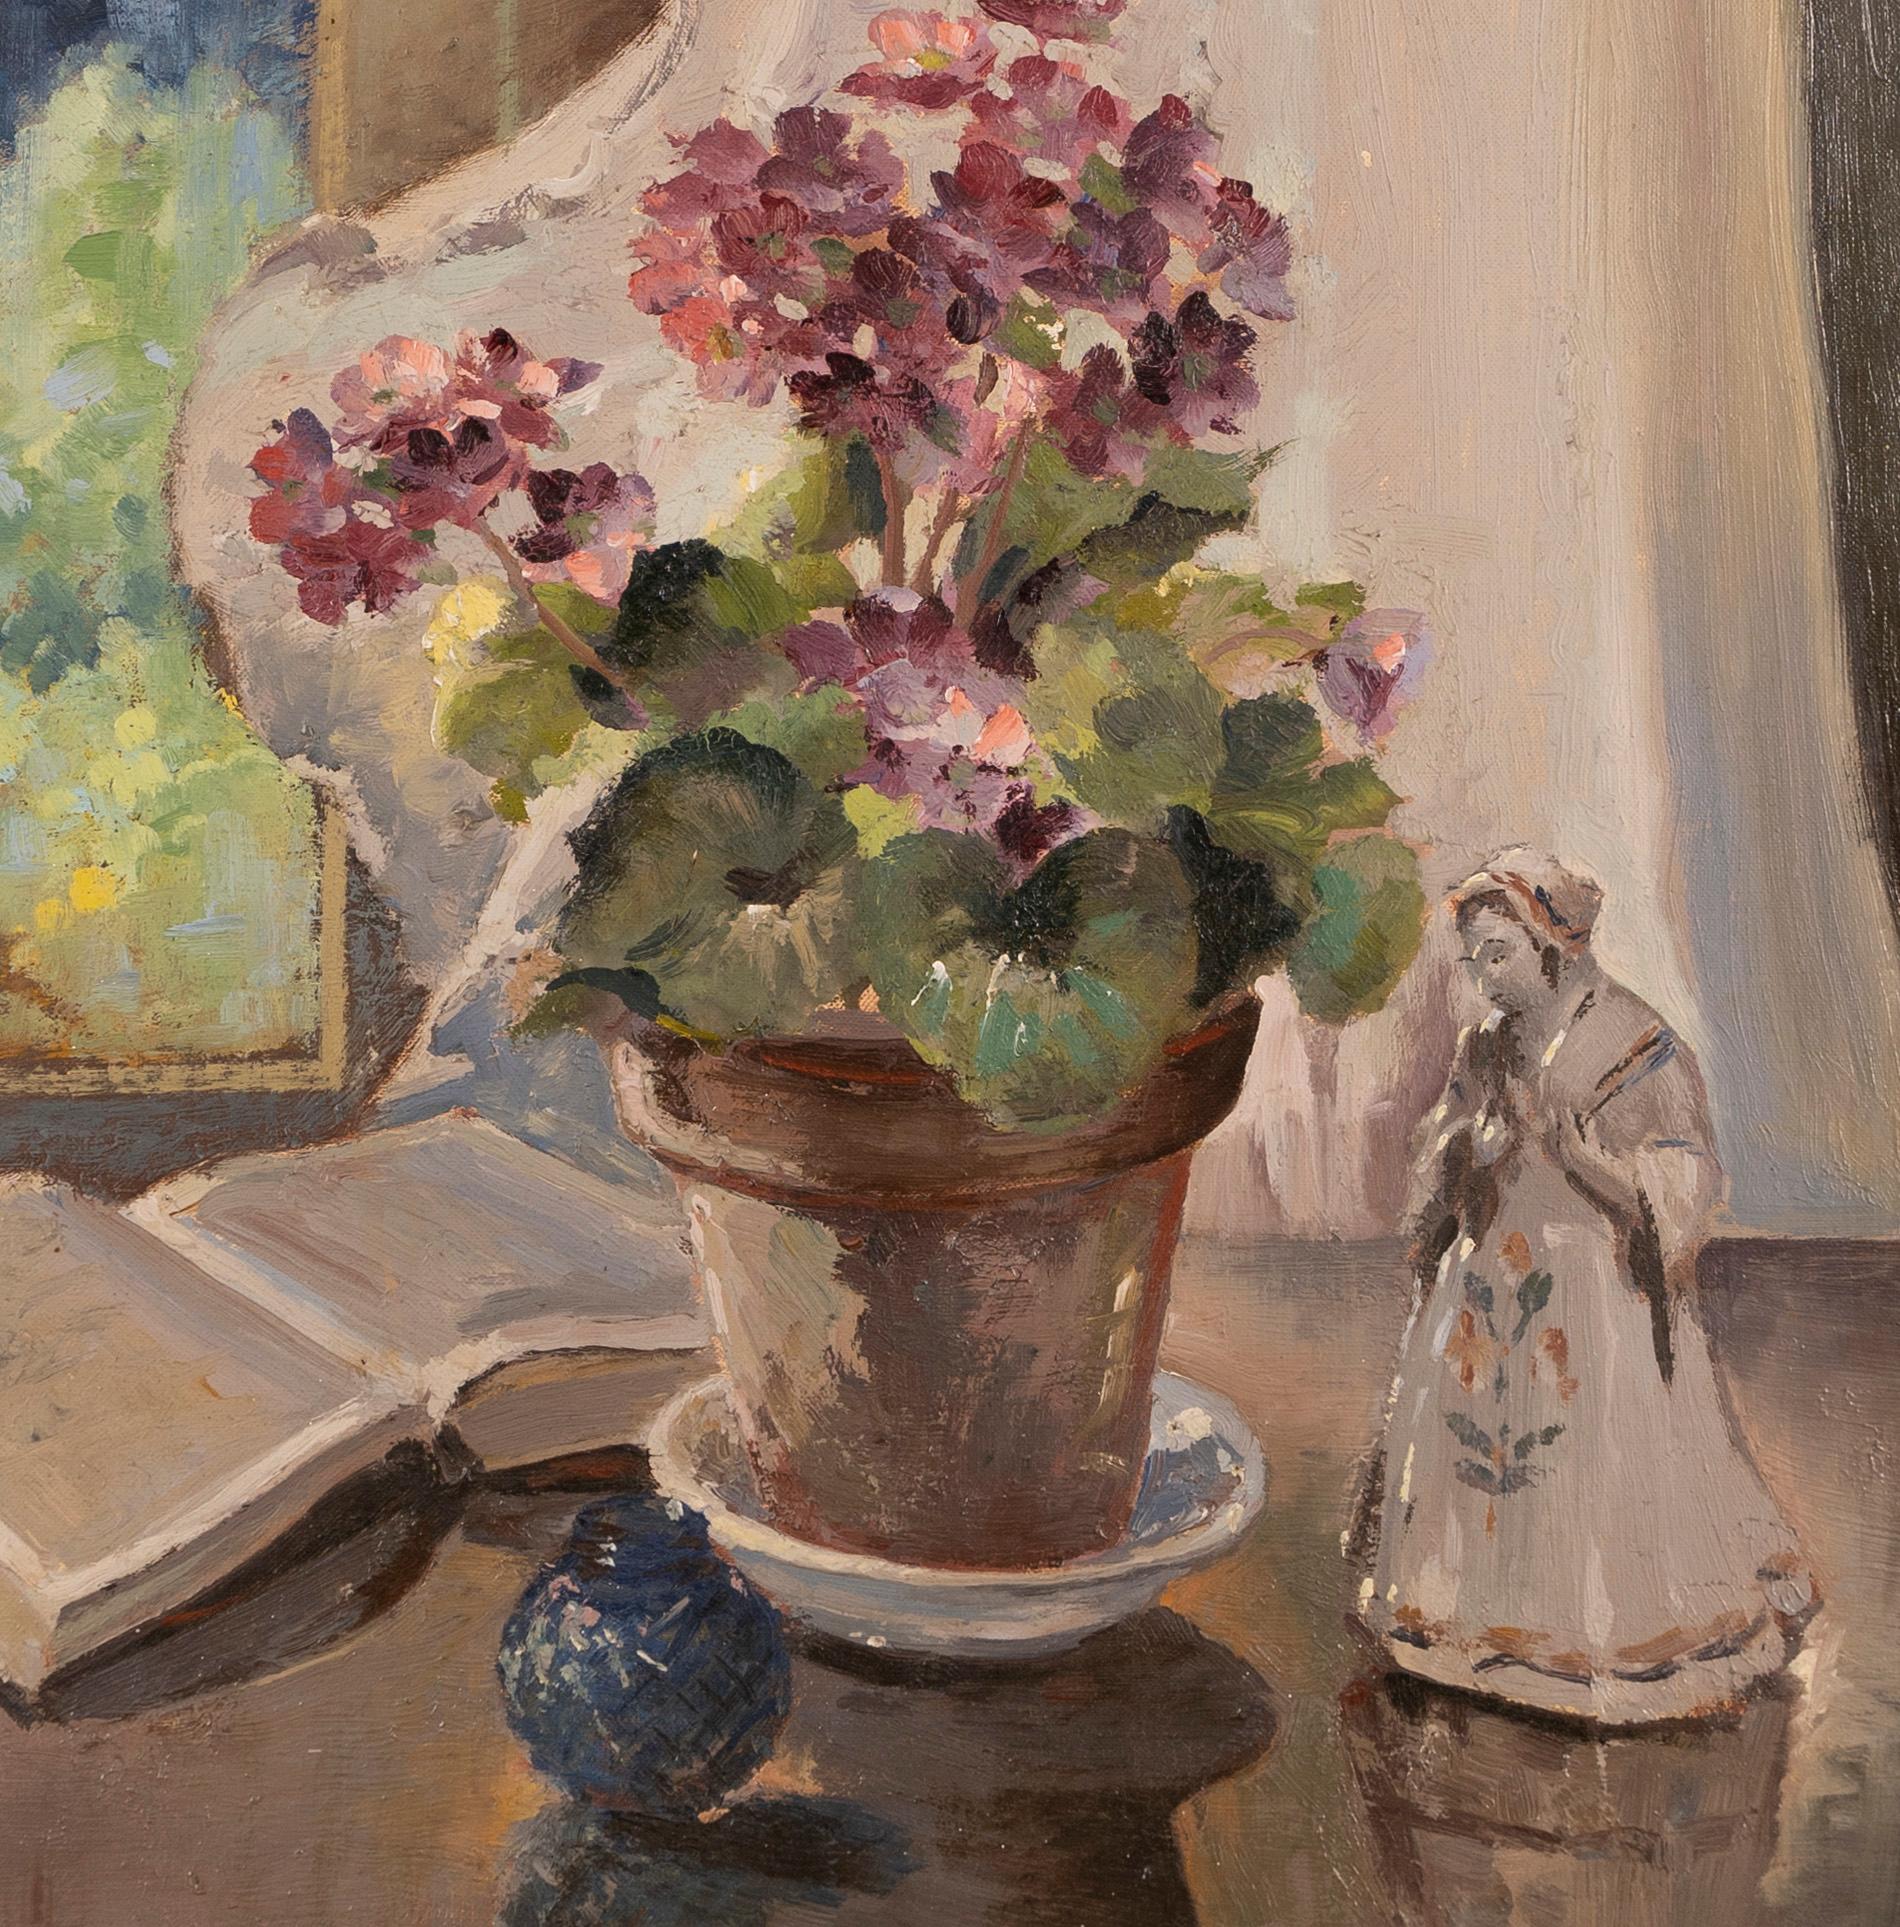 Antique impressionist still life painting by Irene ( I. Stry) Stry (1899/1904 - 1963).  Oil on board, circa 1940.  Unterschrieben.  Image size, 24L x 20H.  